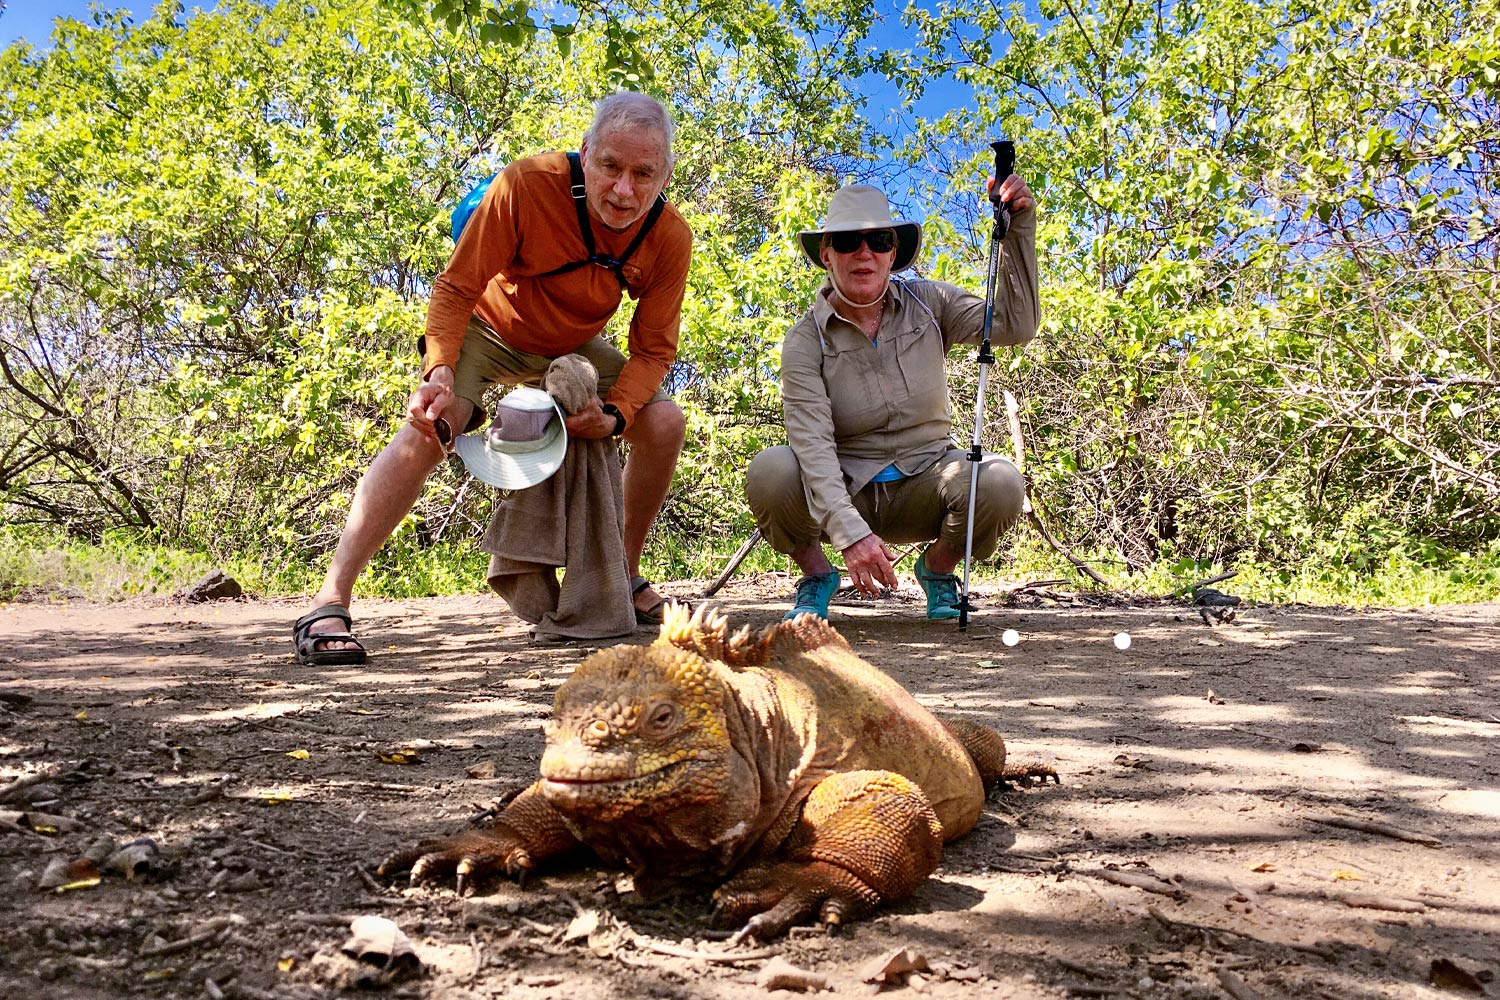 Jim and Mary Froula look at land iguana on the Galapagos Islands